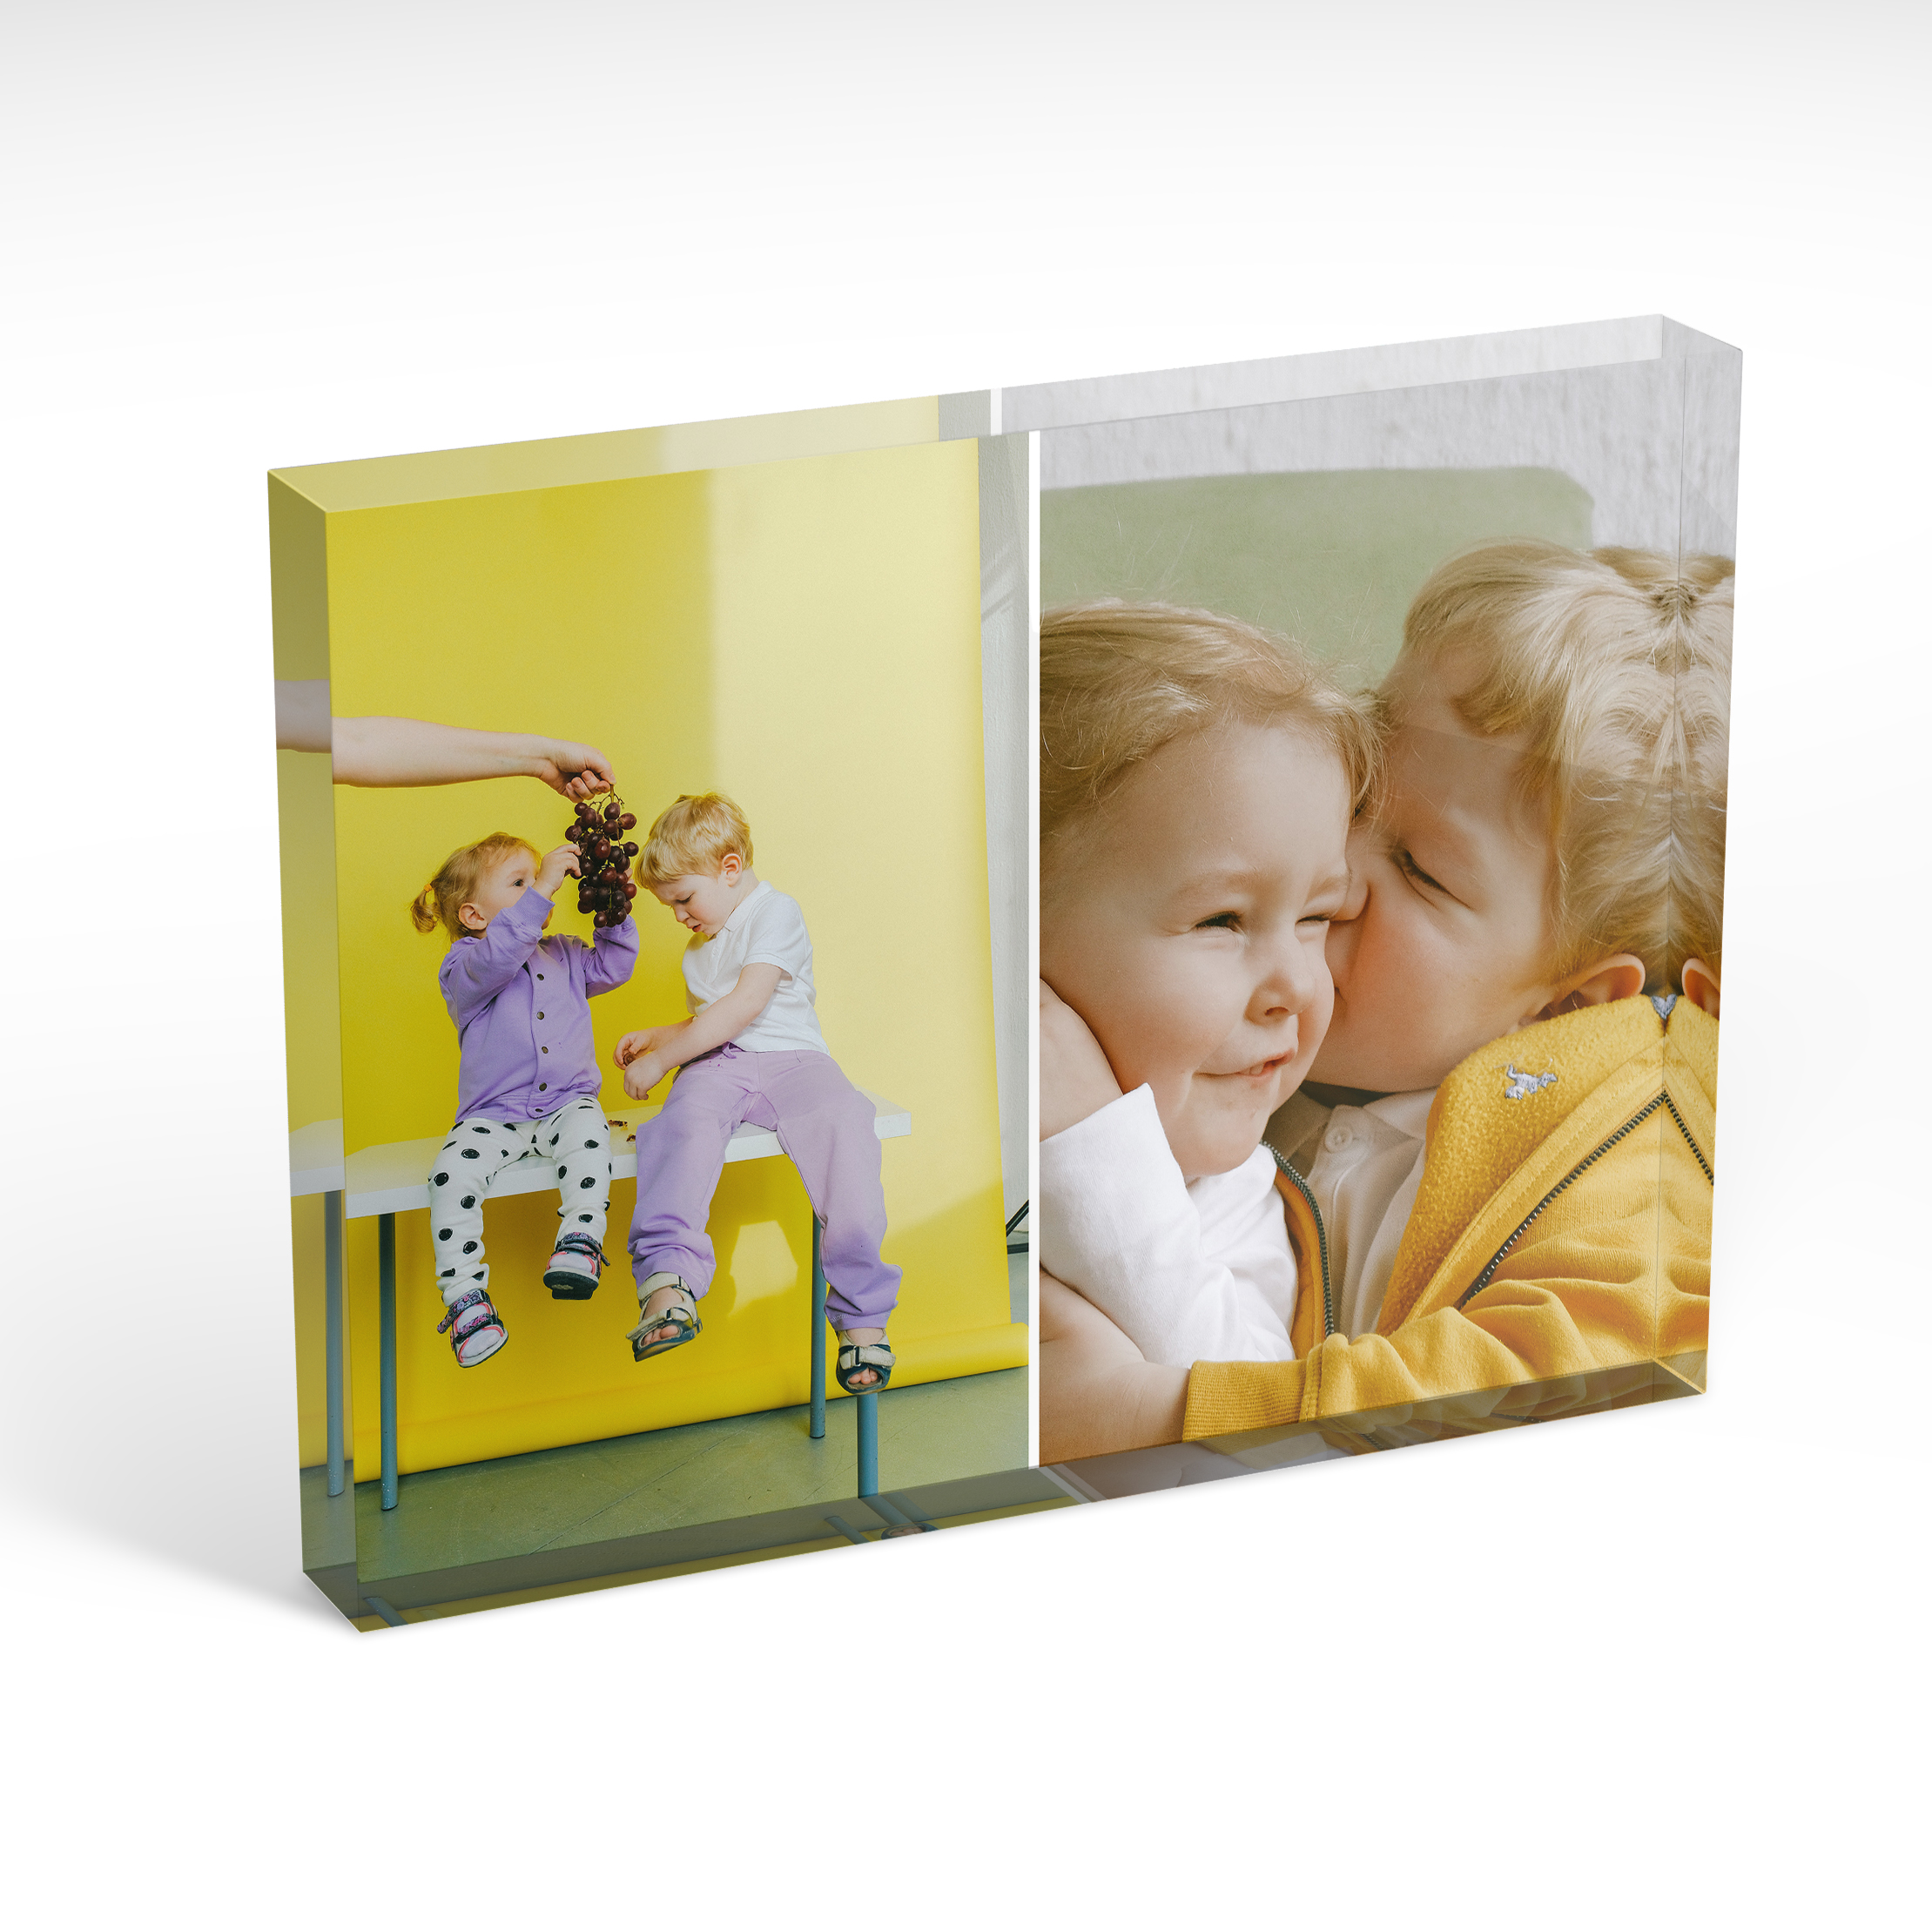 An angled side view of a landscape layout Acrylic Glass Photo Block with space for 2 photos. Thiis design is named "Double Trouble". 